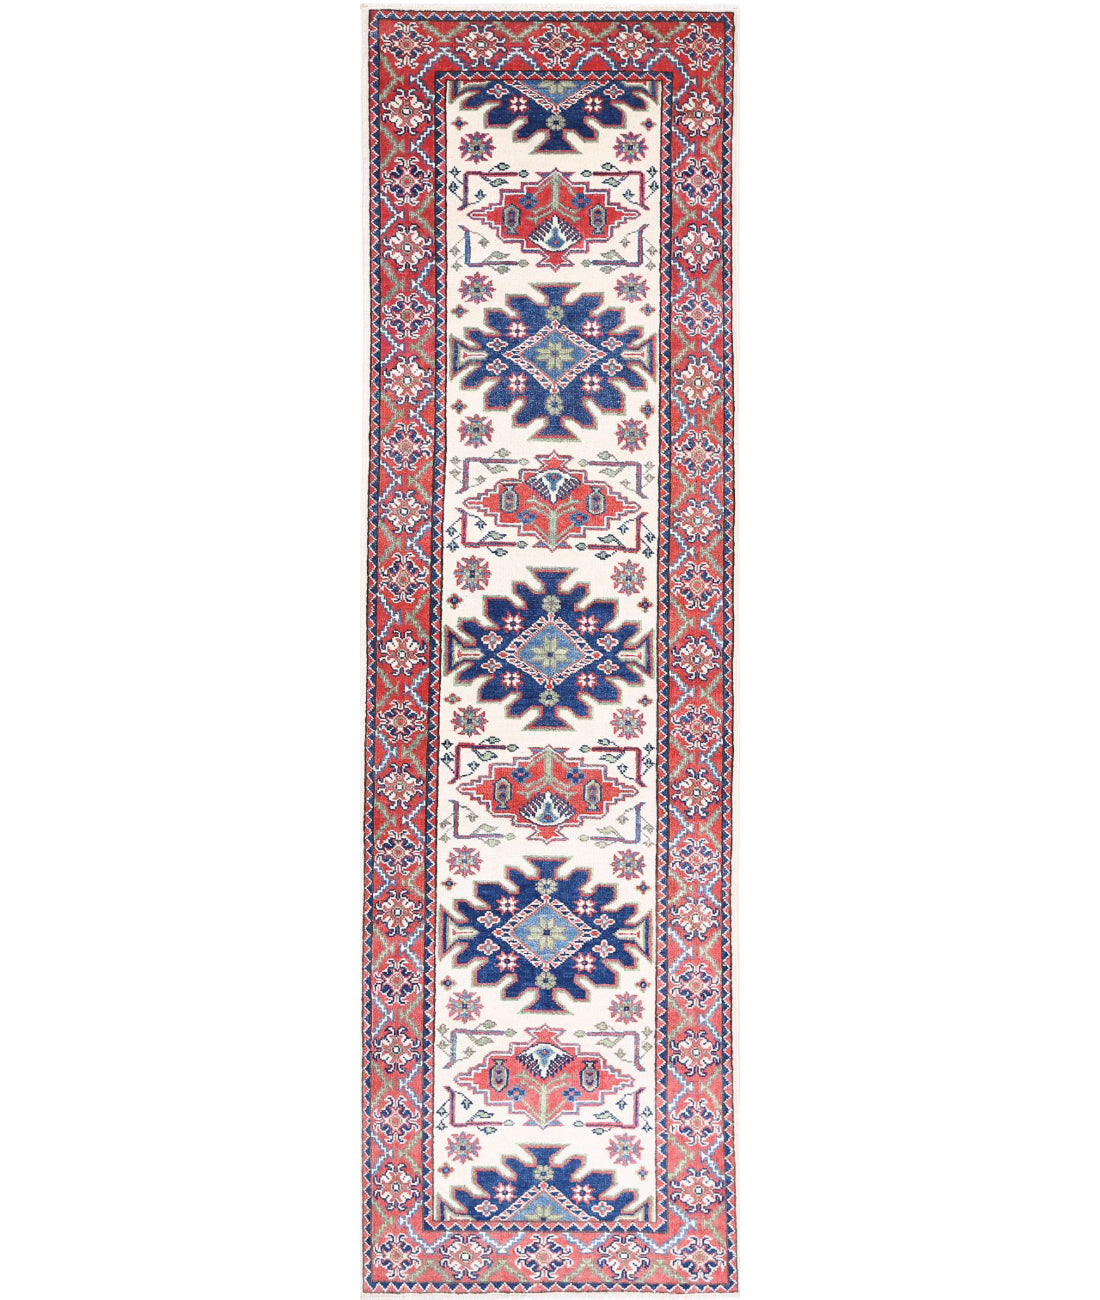 Hand Knotted Tribal Kazak Wool Rug - 2&#39;6&#39;&#39; x 9&#39;7&#39;&#39; 2&#39;6&#39;&#39; x 9&#39;7&#39;&#39; (75 X 288) / Ivory / Red